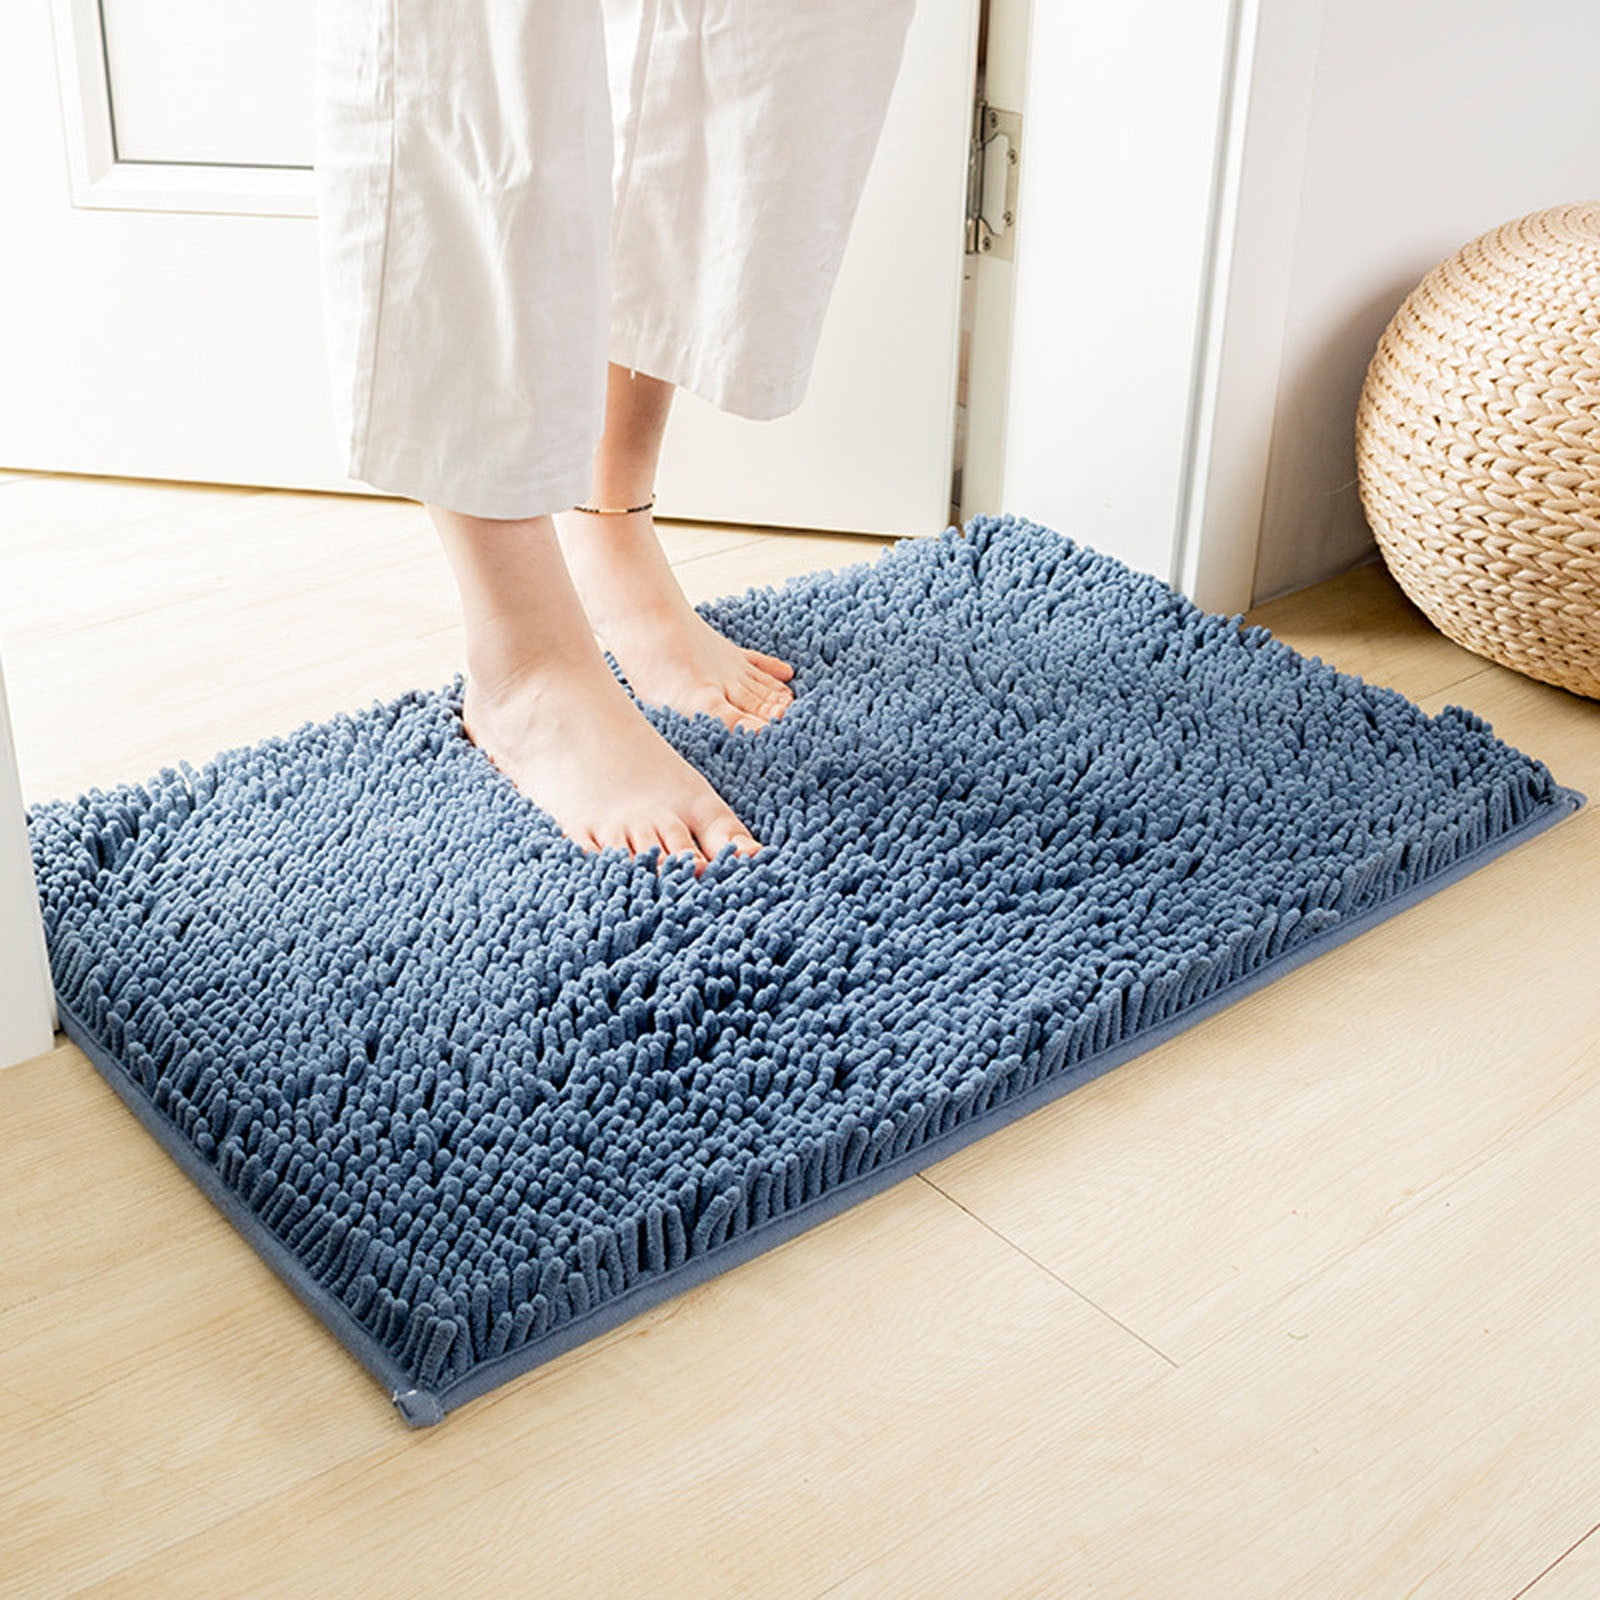 Christmas Decorations Clearance LAWOR Bathroom Rug,Soft And  Comfortable,Puffy And Durable Thick Bath Mat,Machine Washable Bathroom Mats,Non-Slip  Bathroom Rugs For Shower And Under Sink Blue I385 - Walmart.com